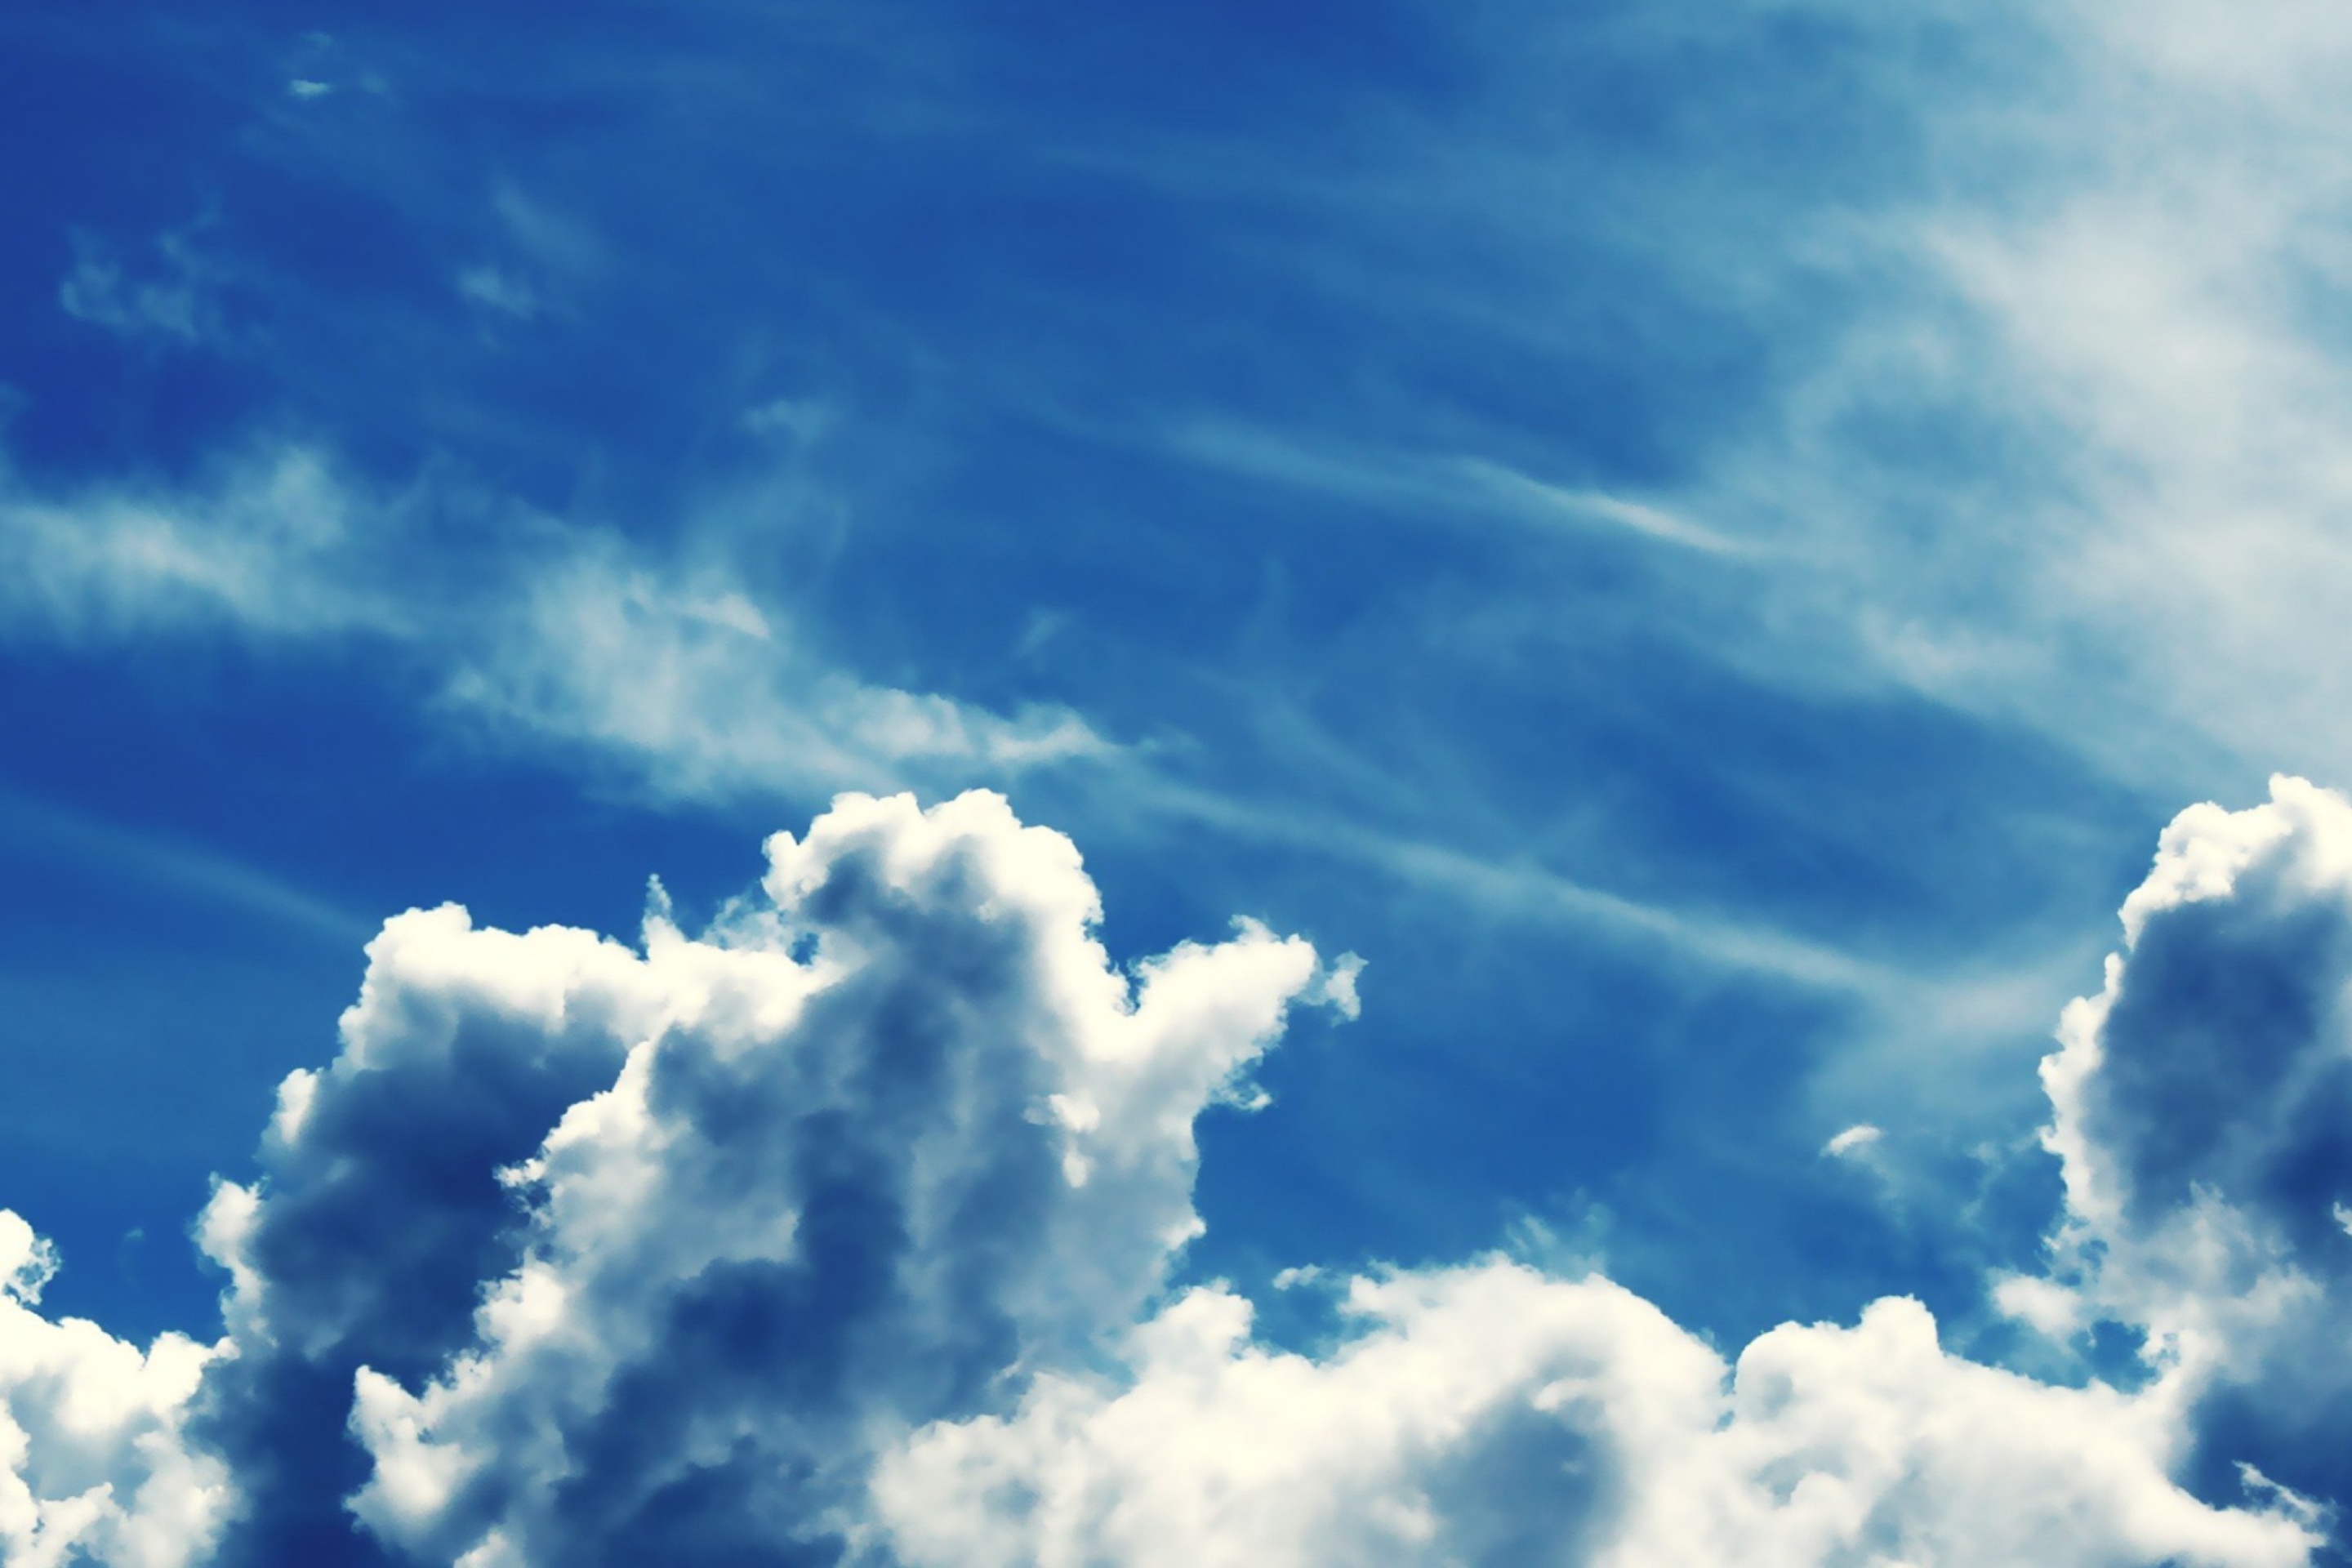 Blue Sky With Clouds wallpaper 2880x1920